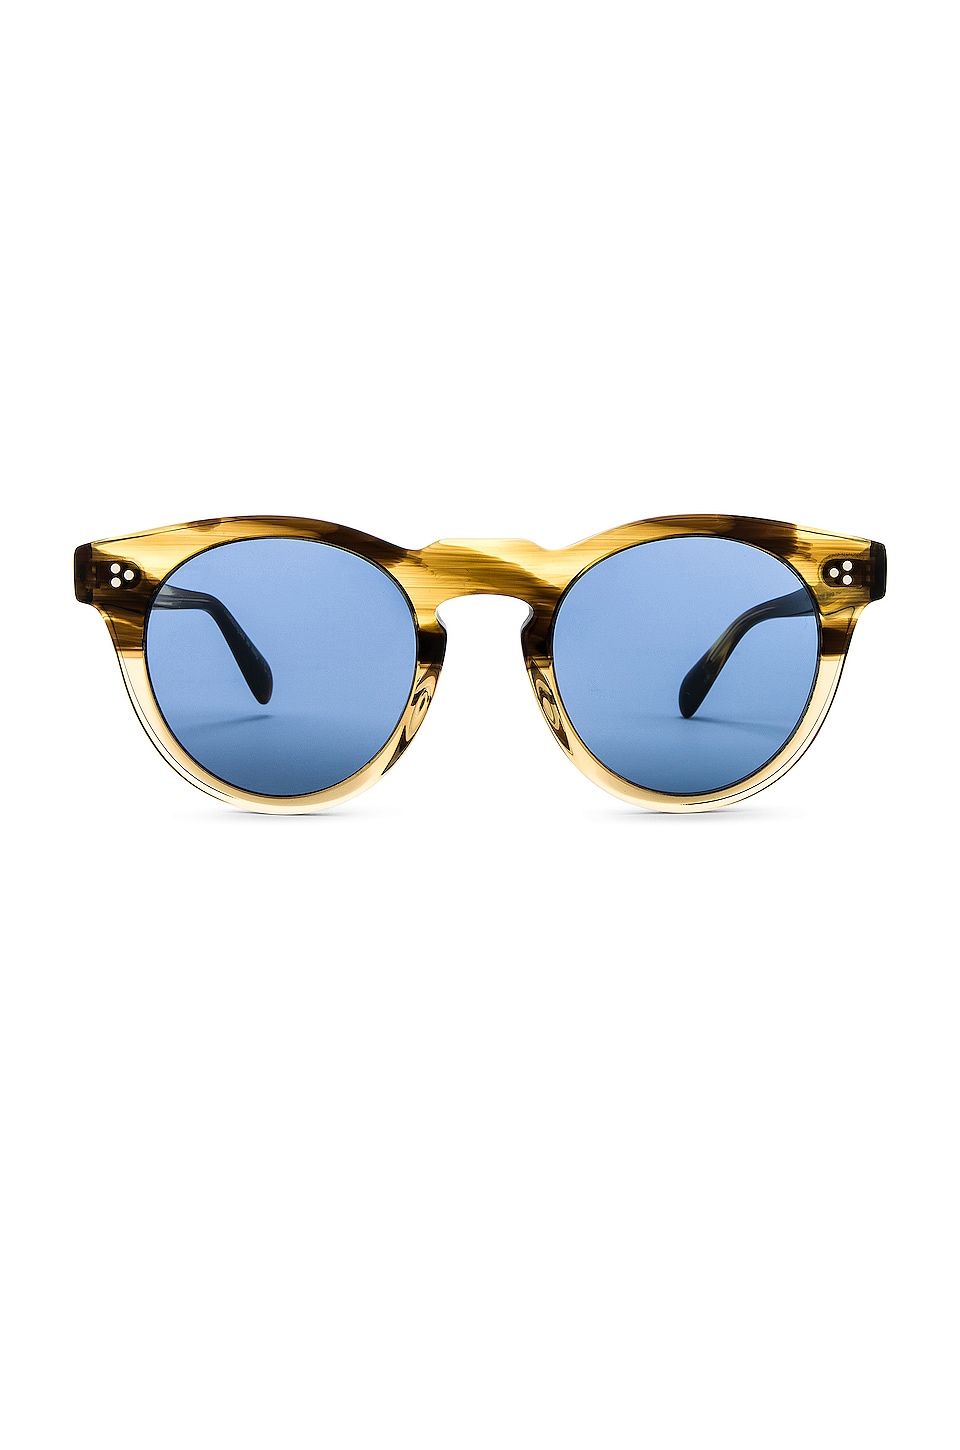 Oliver Peoples Lewen Sunglasses in Canarywood Gradient | REVOLVE